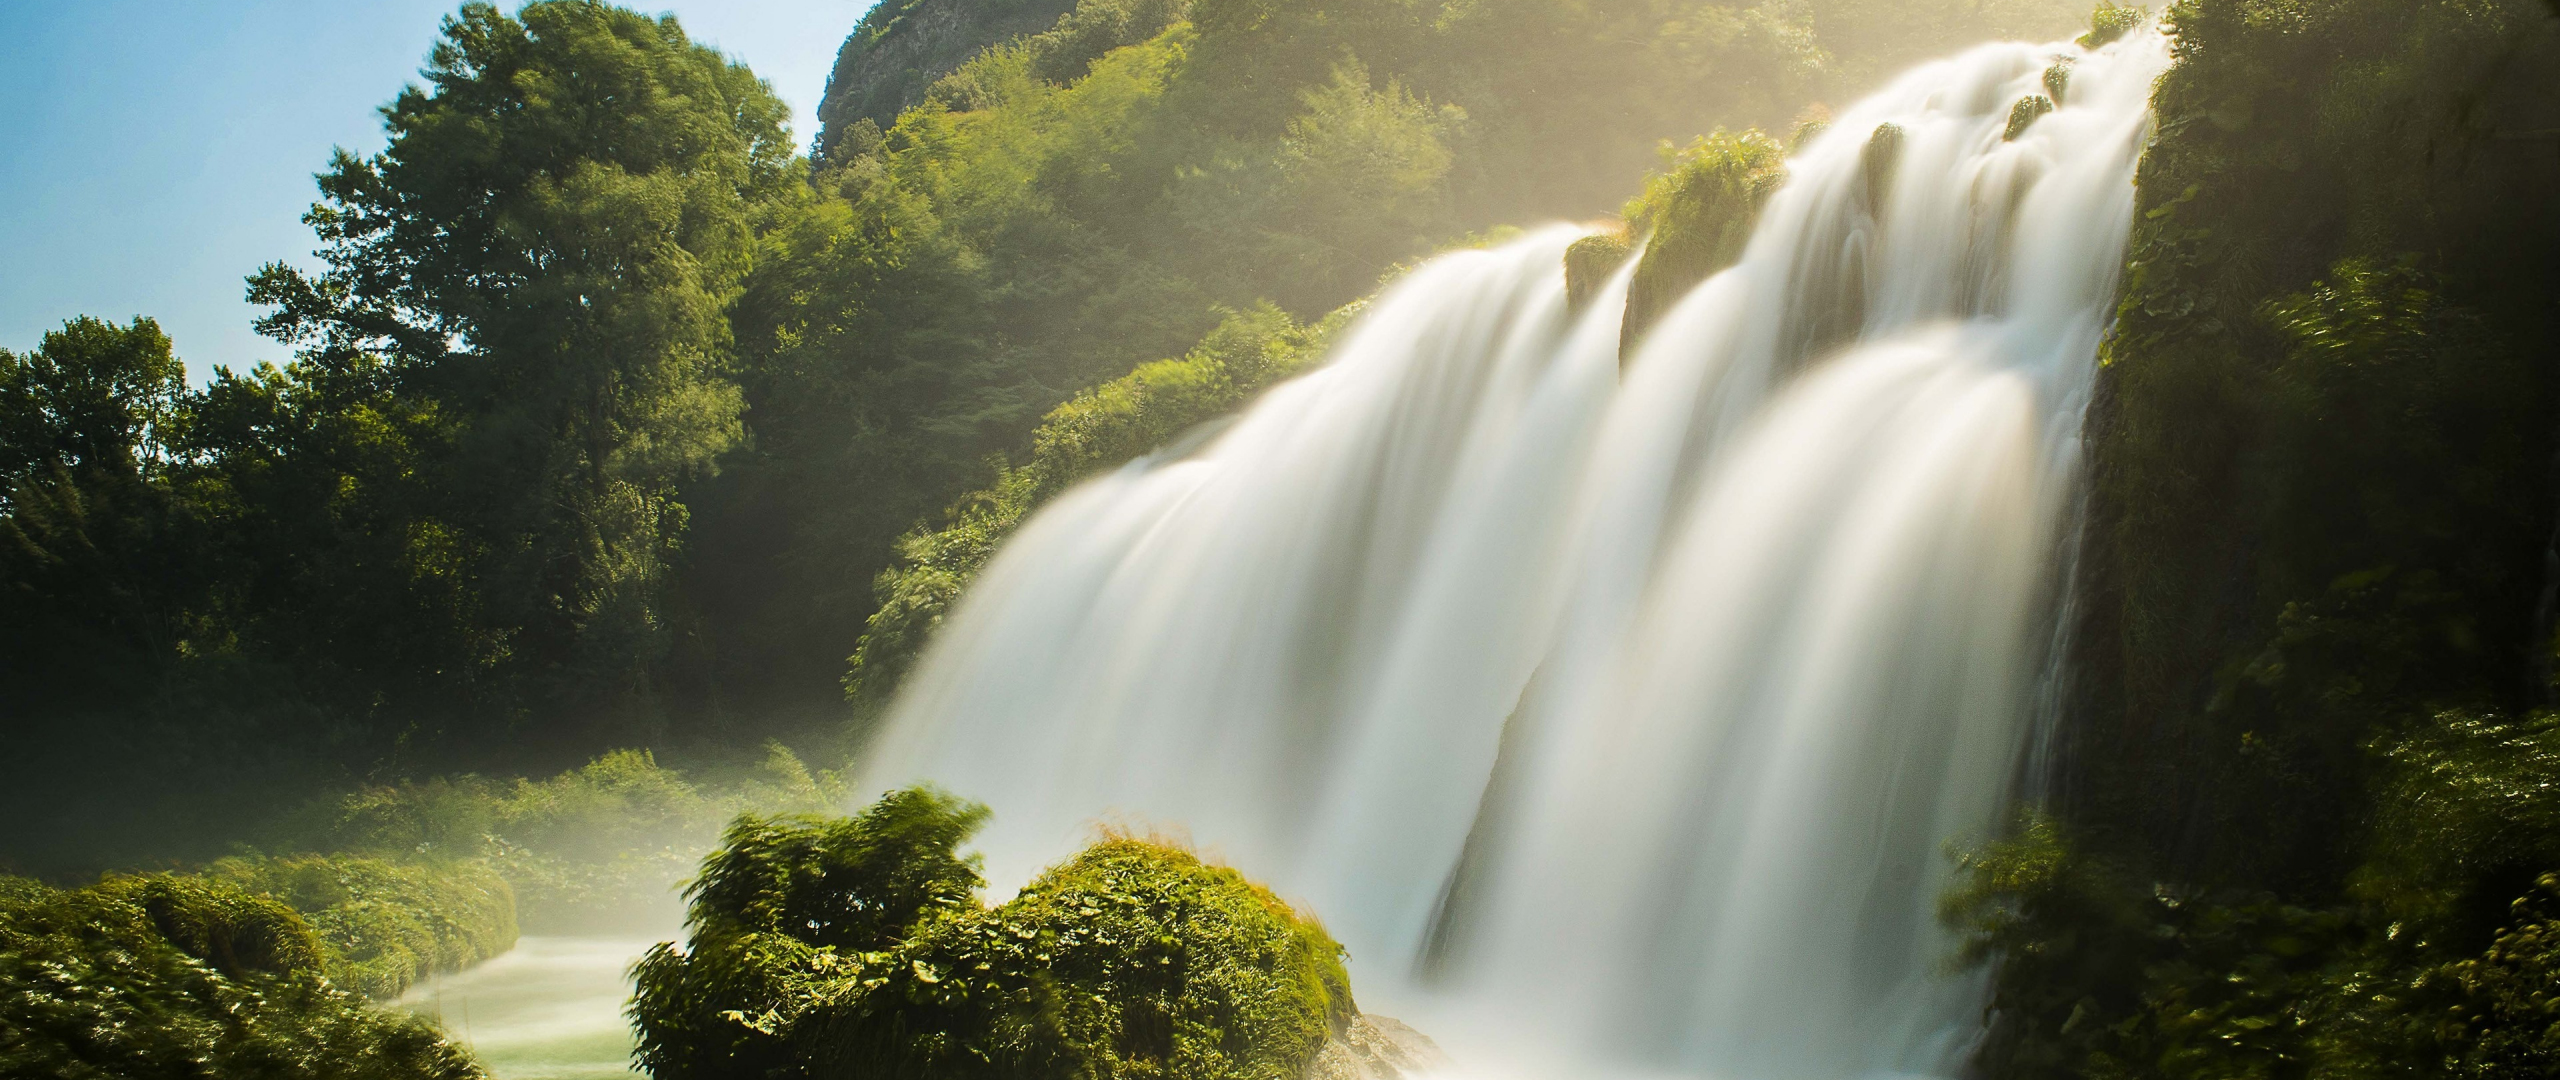 Download waterfall, river, summer, nature 2560x1080 wallpaper, dual wide 2560x1080 HD image, background, 1277